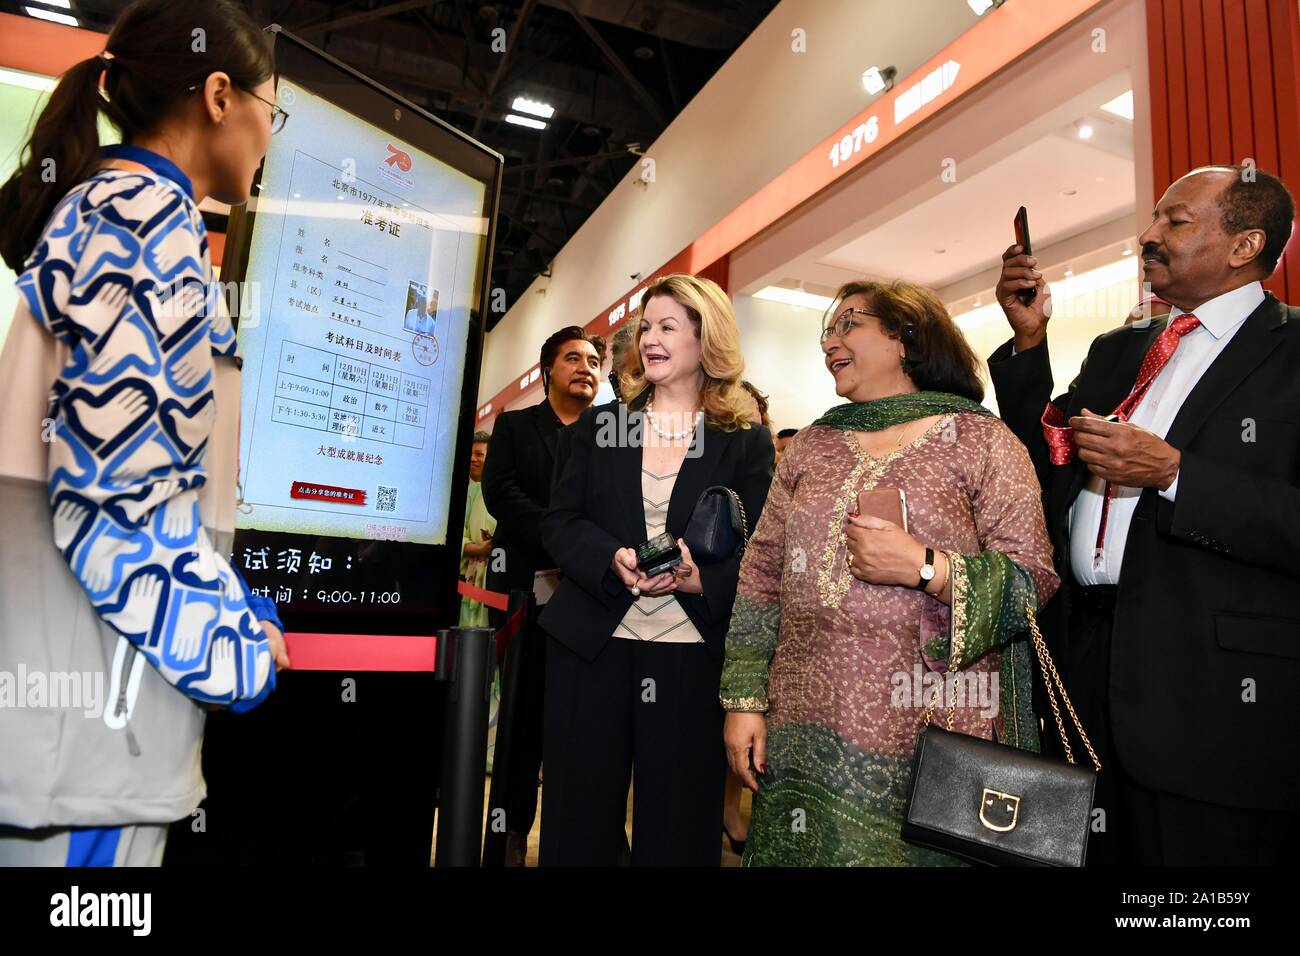 Beijing, China. 25th Sep, 2019. Foreign ambassadors, diplomats and guests view an interact display showing China's national college entrance examination in 1977 at a grand exhibition of achievements in commemoration of the 70th anniversary of the founding of the People's Republic of China (PRC) at the Beijing Exhibition Center in Beijing, capital of China, Sept. 25, 2019. Credit: Jiang Kehong/Xinhua/Alamy Live News Stock Photo